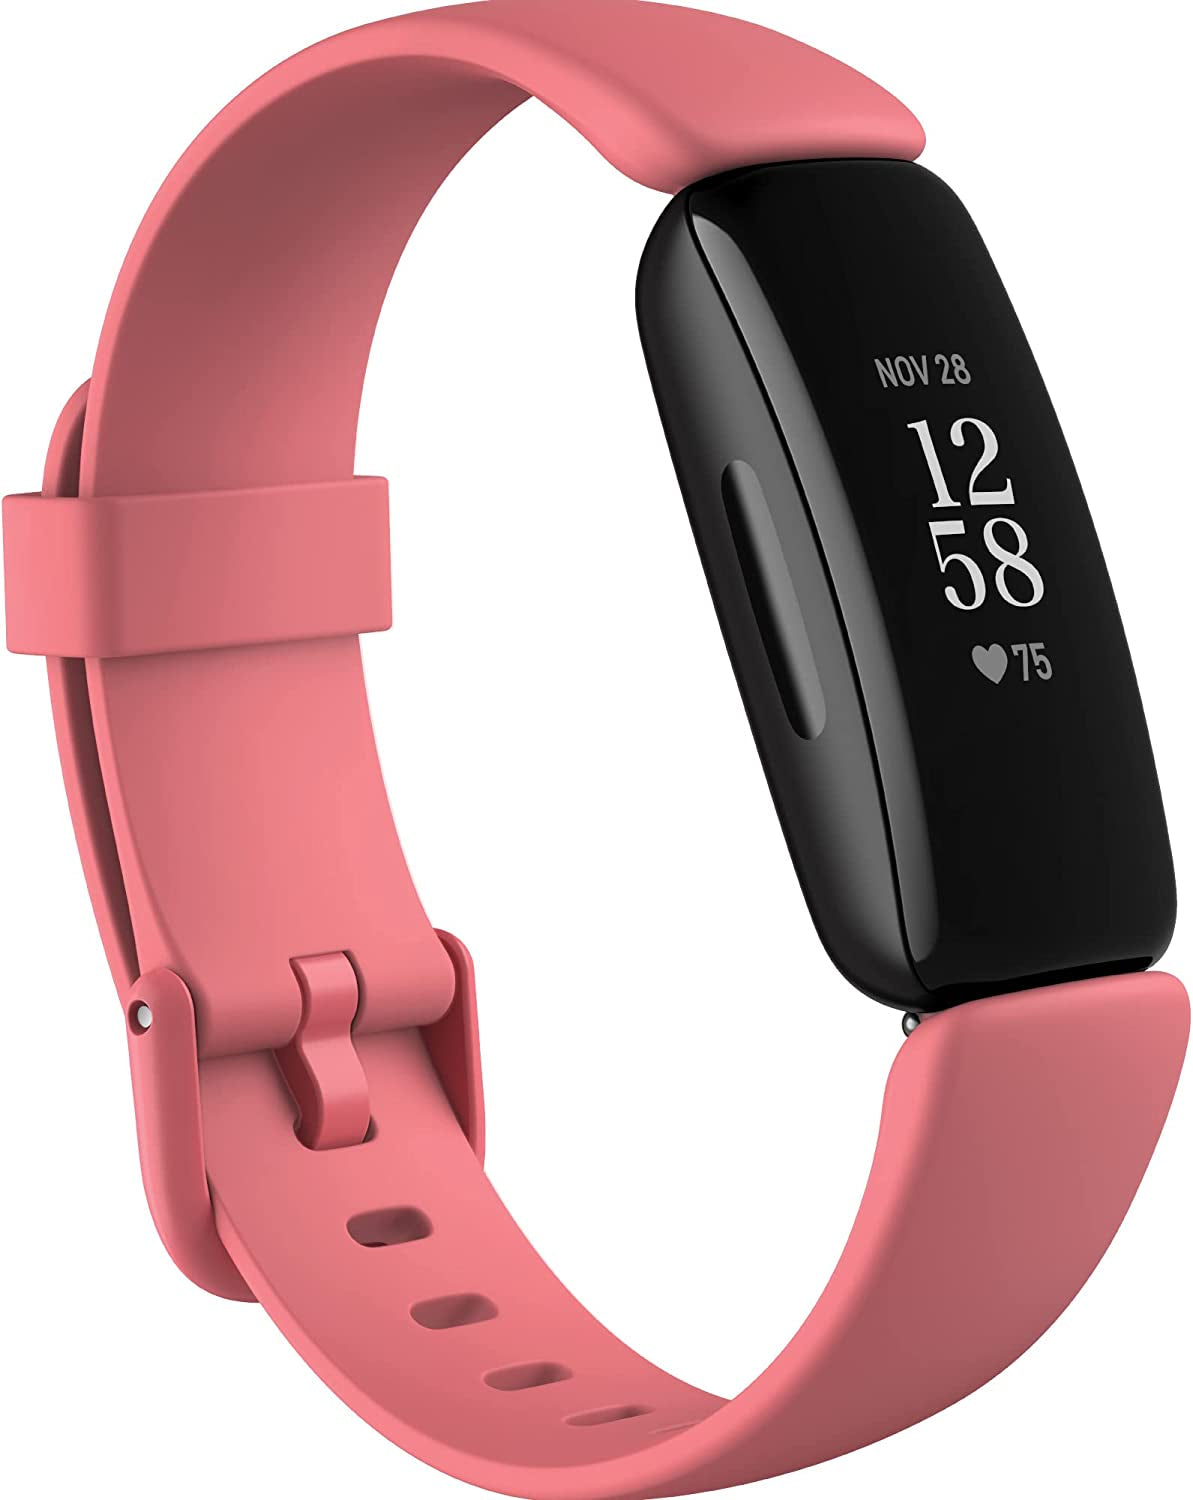 Inspire 2 Health & Fitness Tracker with a Free 1-Year  Premium Trial, 24/7 Heart Rate, Black/Desert Rose, One Size (S & L Bands Included)